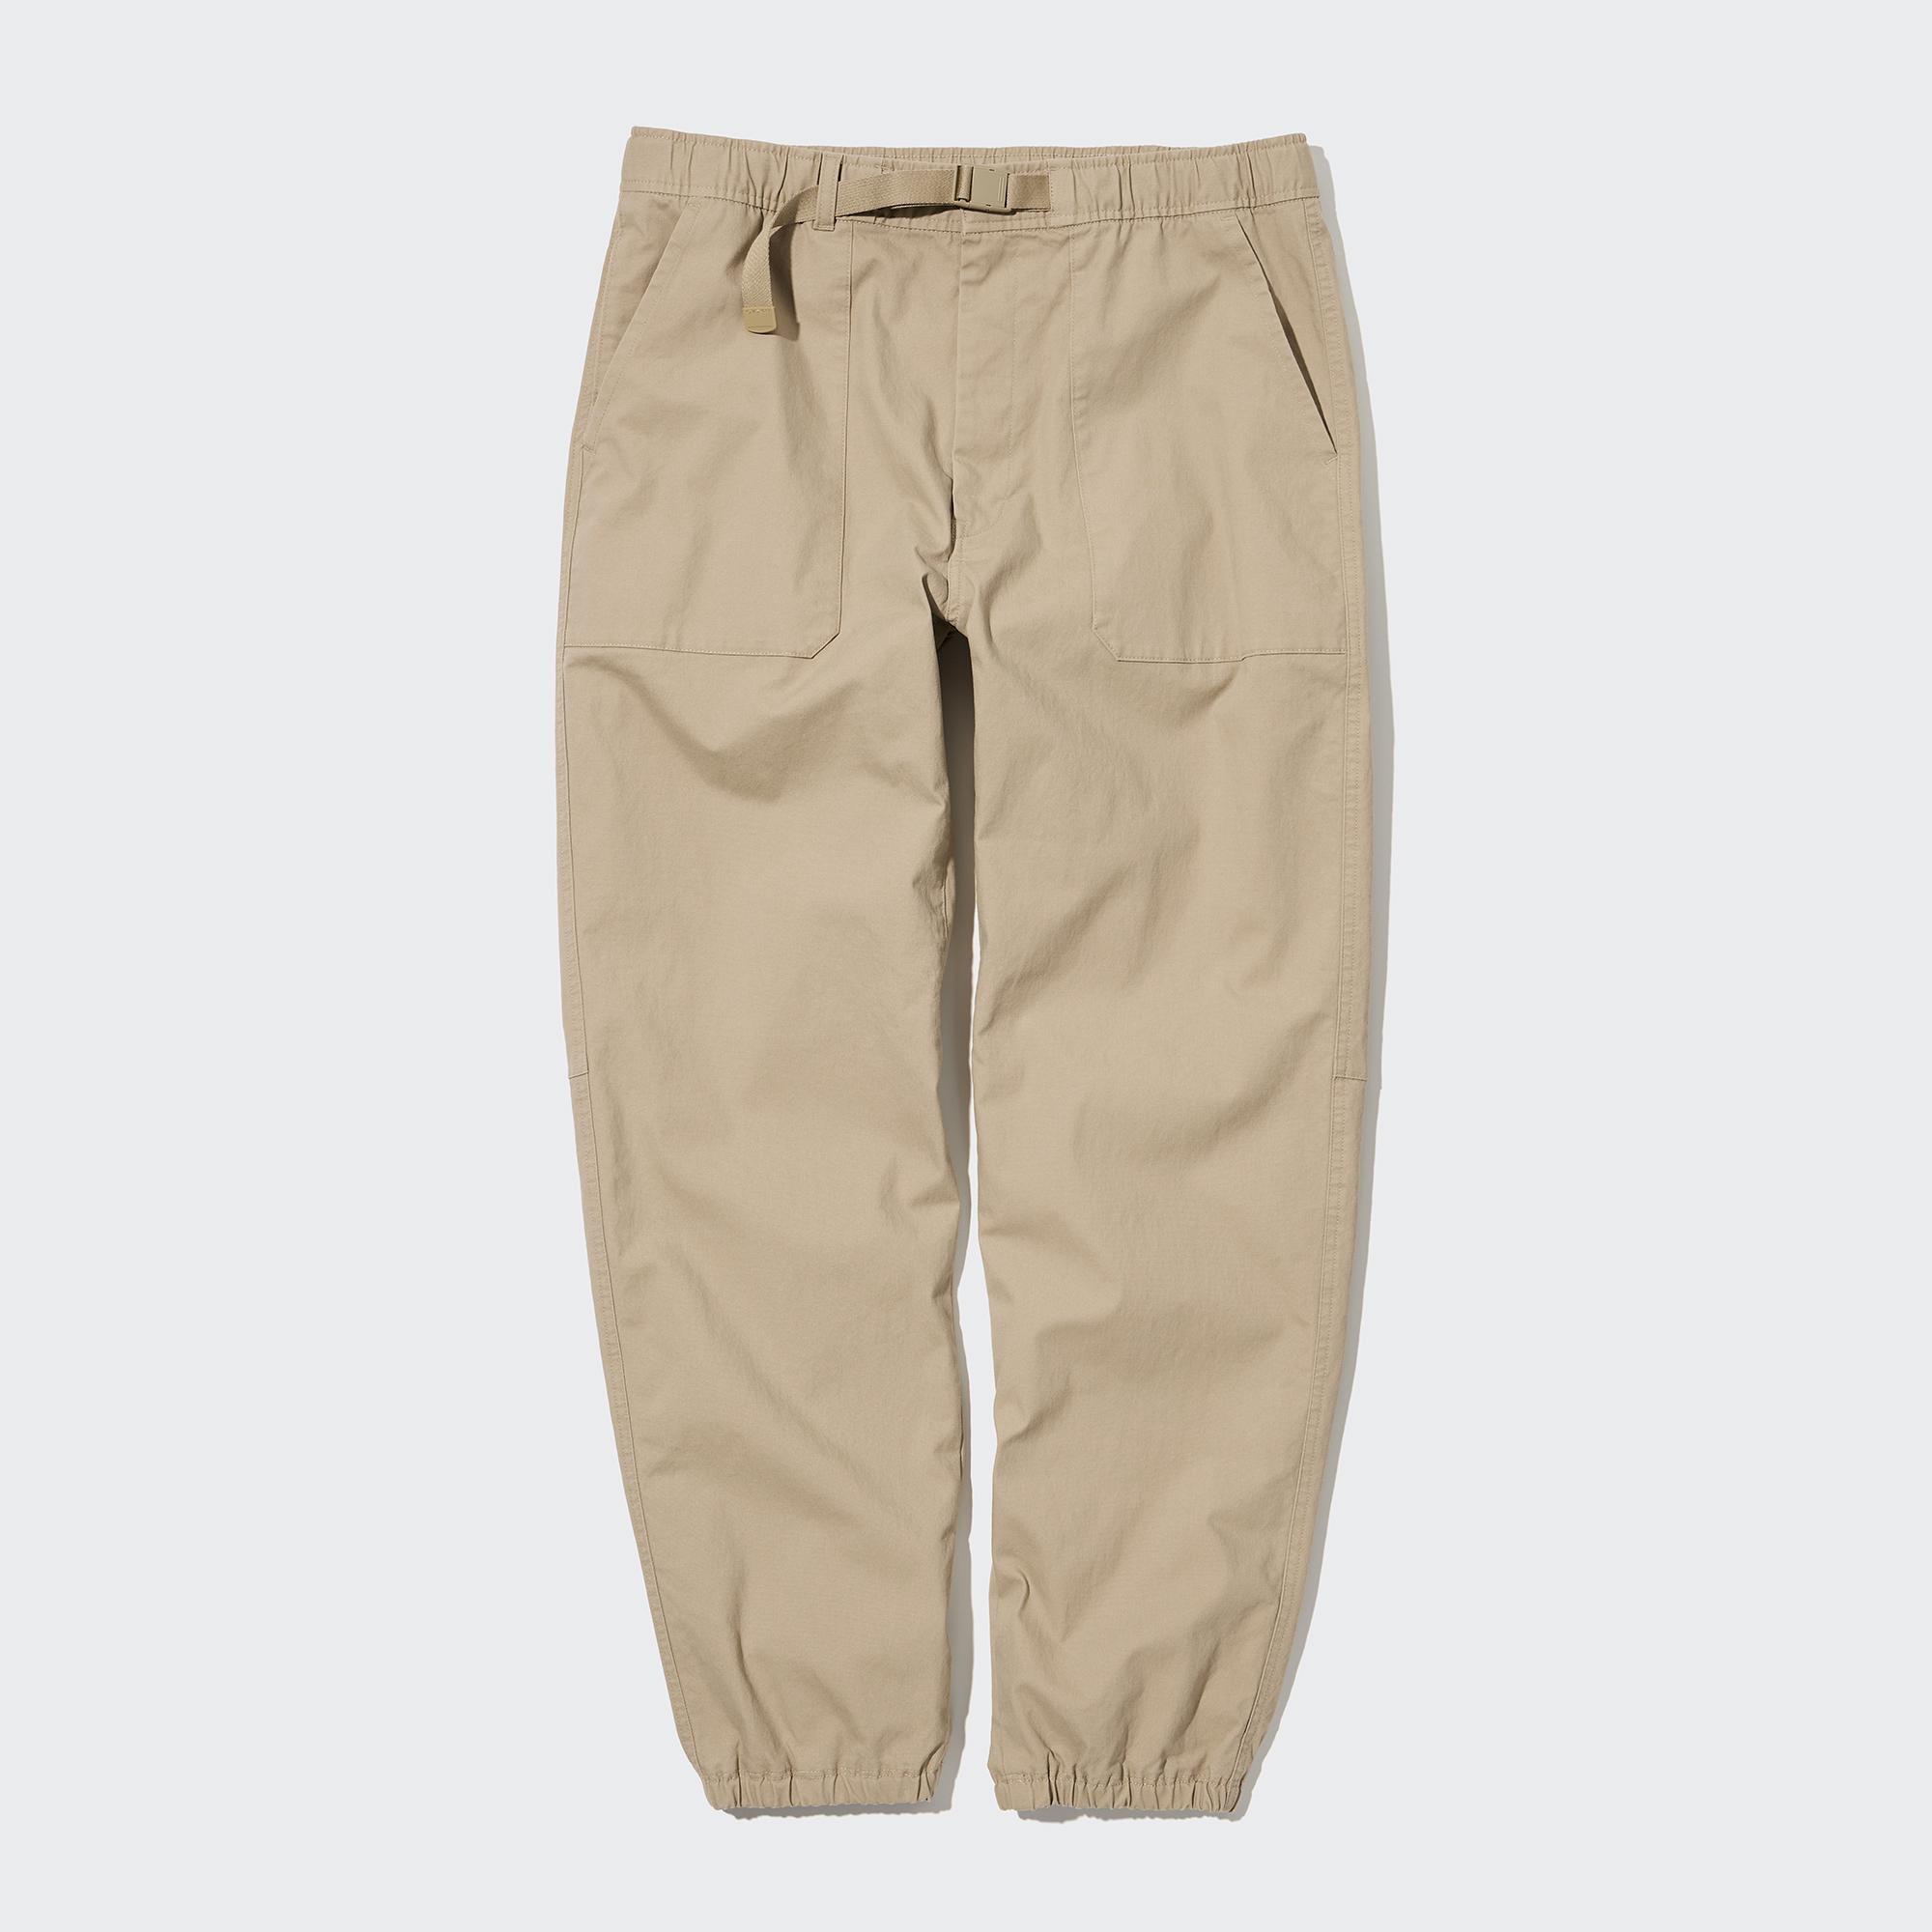 Stanley/Stella - Decker Wave Terry - The Unisex Relaxed Jogger Pants -  STBU588